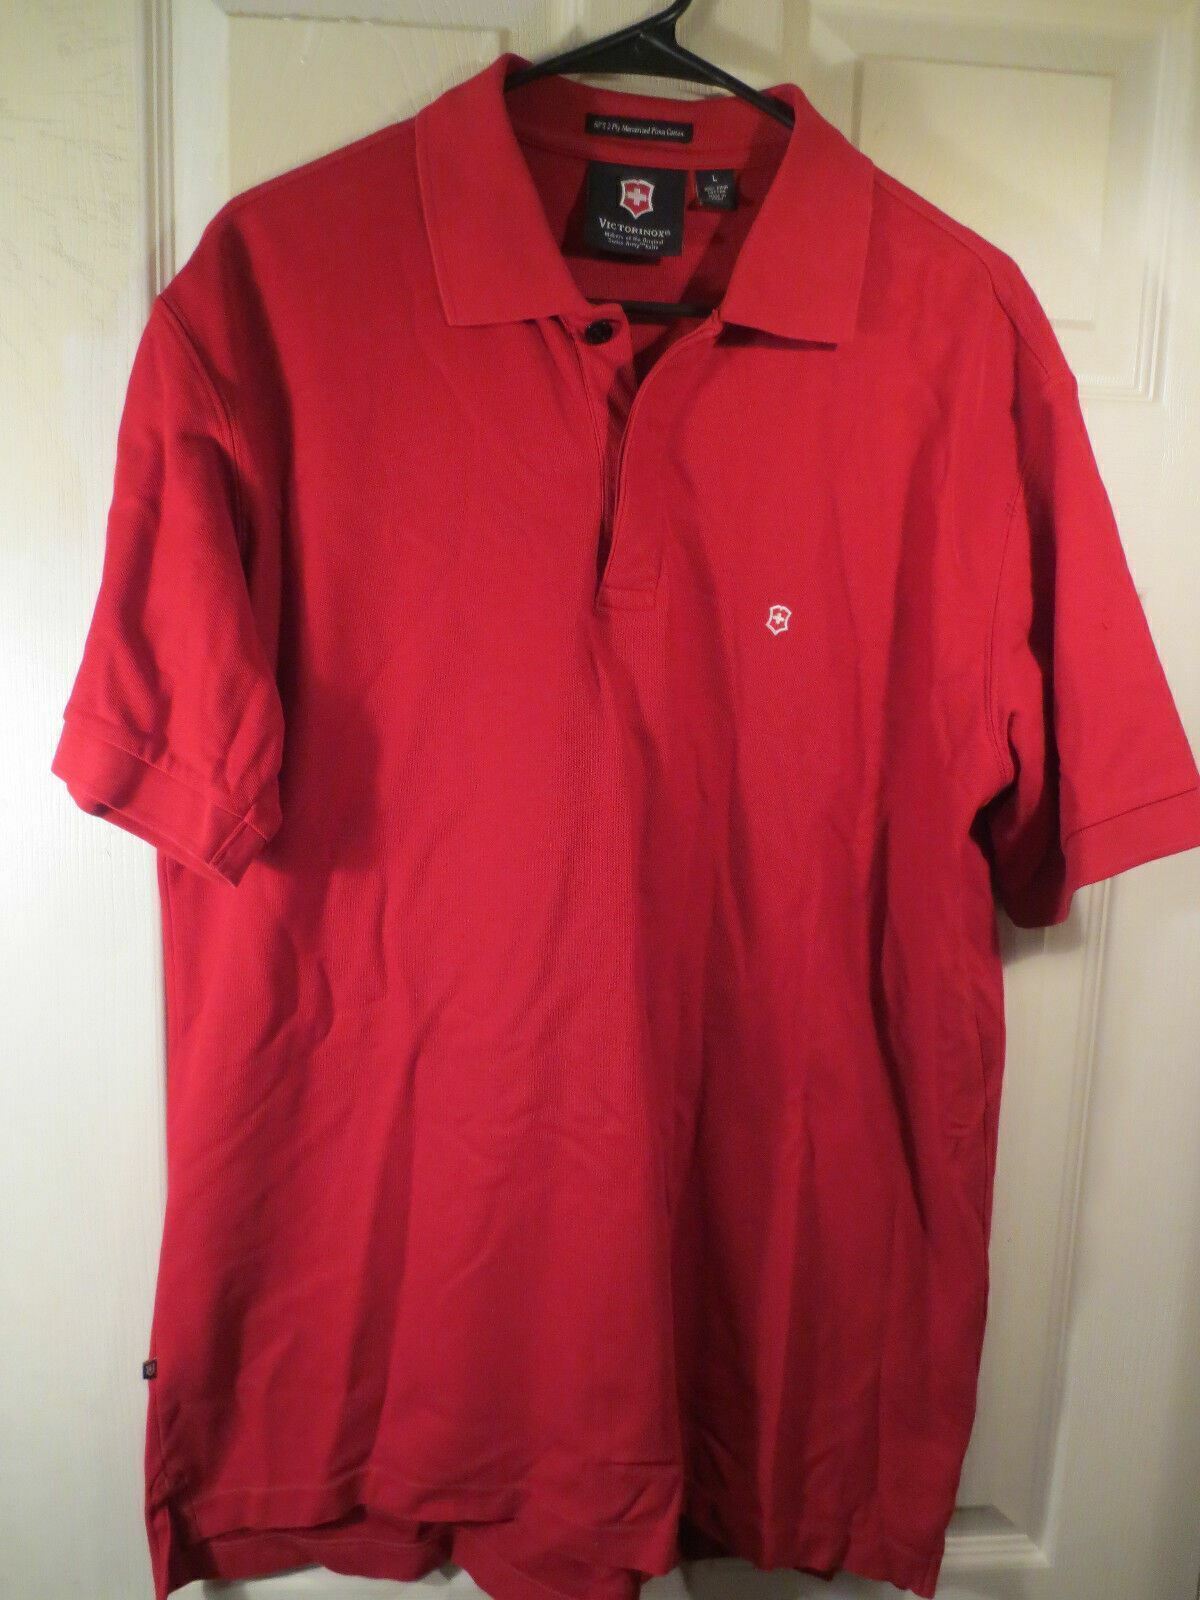 Victorinox Mens Polo Rugby Shirt Vented Red w/Cross Logo On Chest Size Large